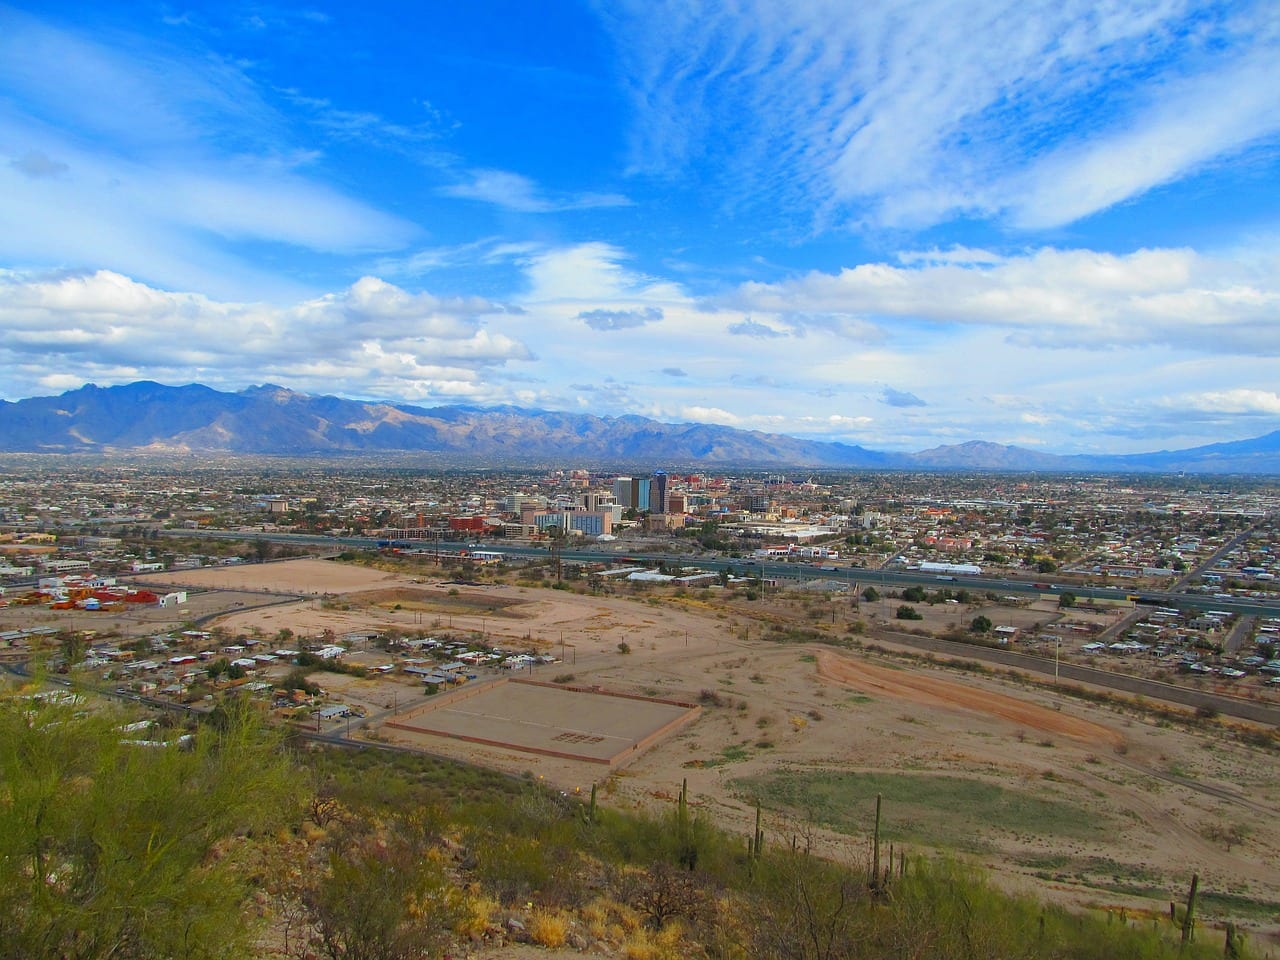 Image of where we provide answering services in Tucson, Arizona